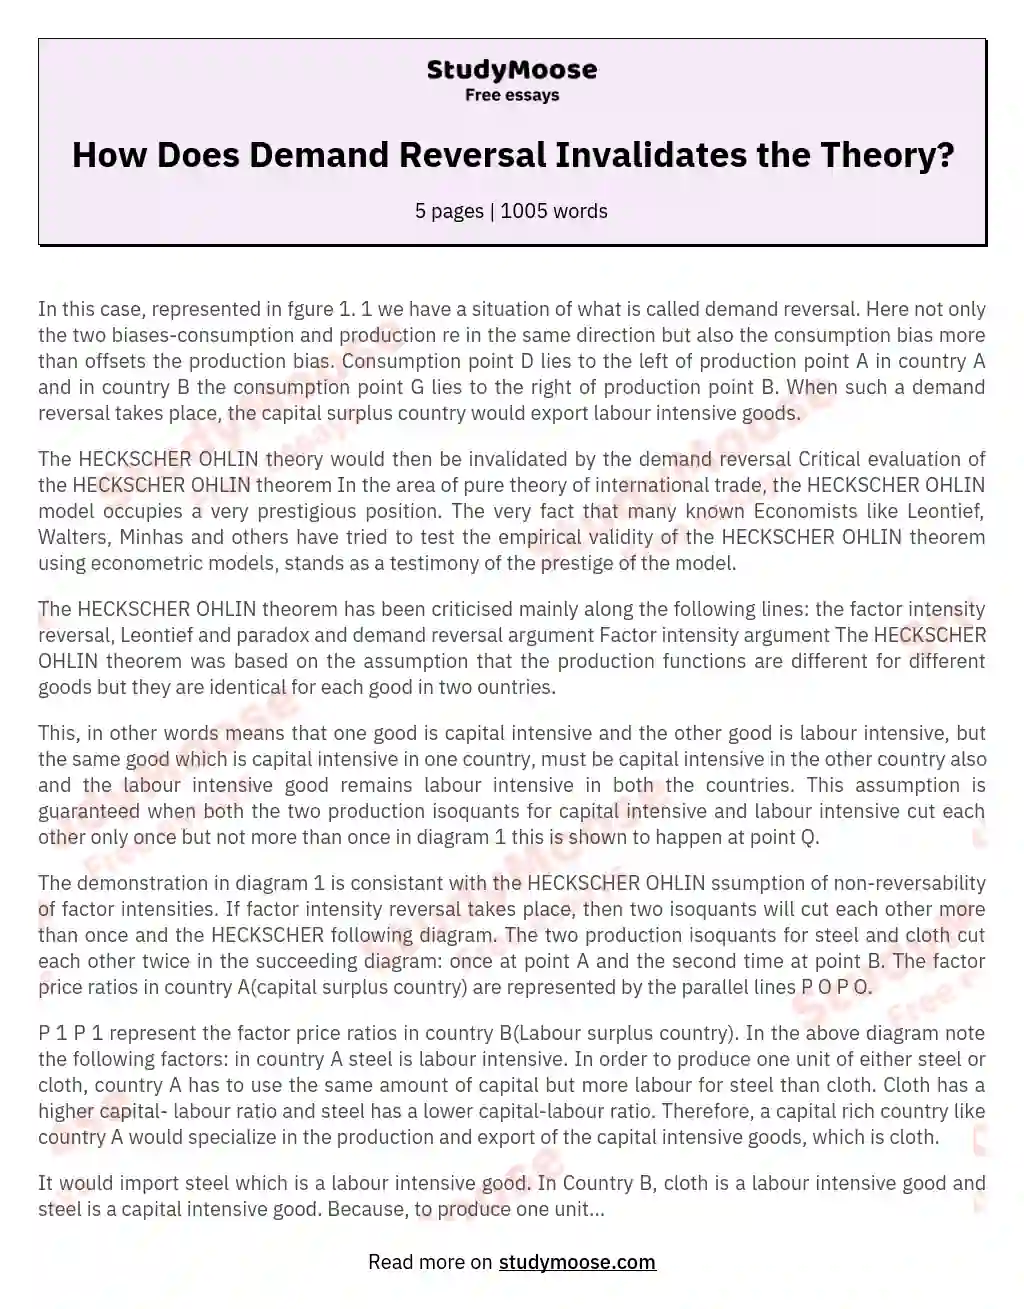 How Does Demand Reversal Invalidates the Theory? essay